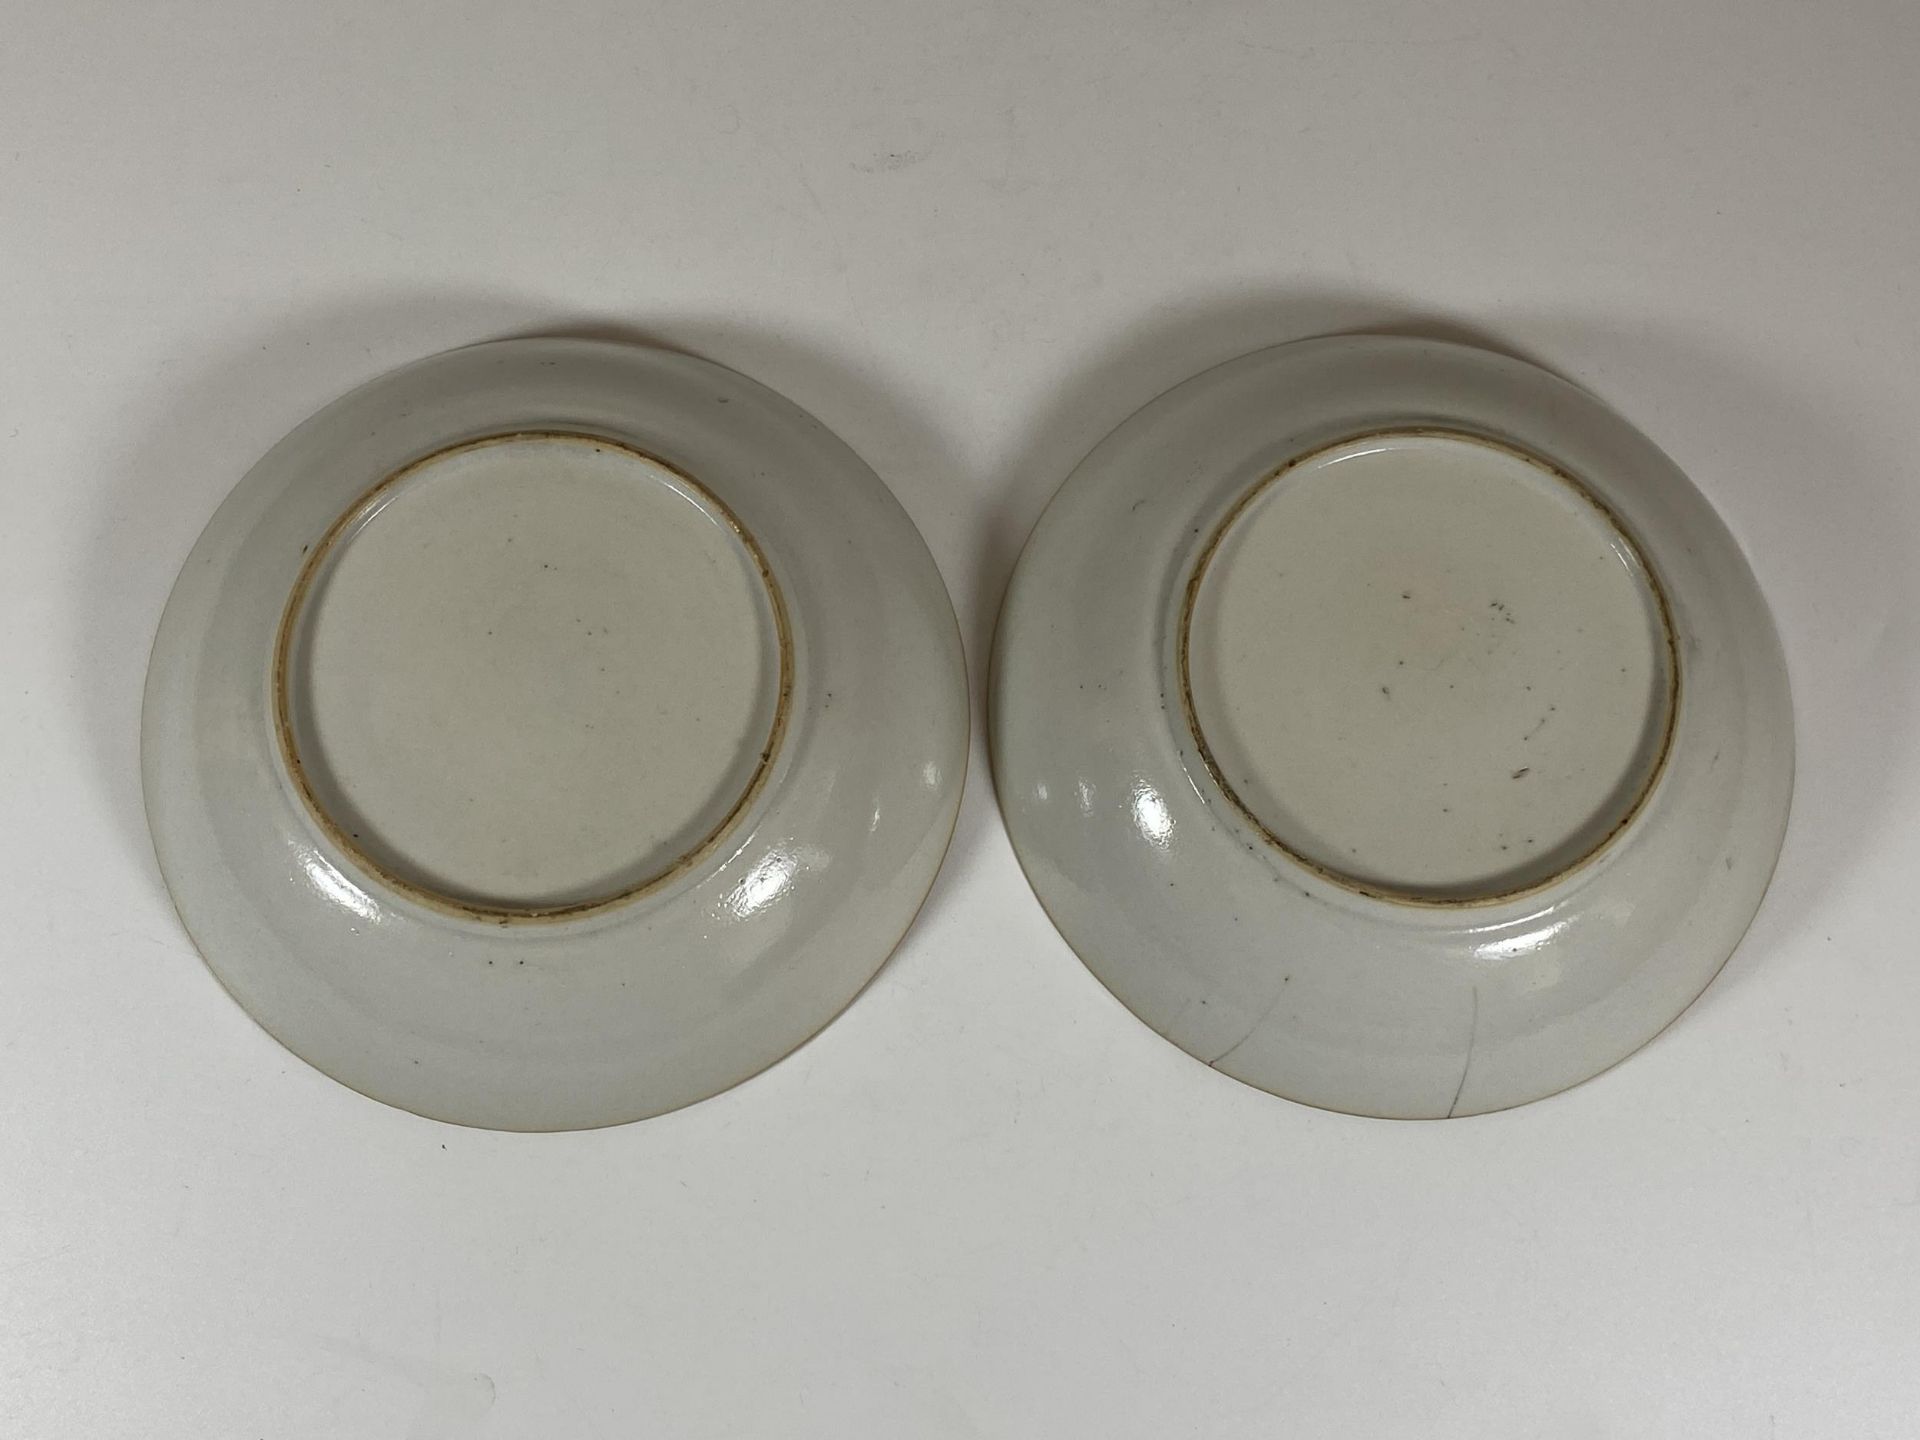 A PAIR OF 19TH CENTURY CHINESE BLUE AND WHITE PORCELAIN DISHES, DIAMETER 16CM - Image 4 of 6